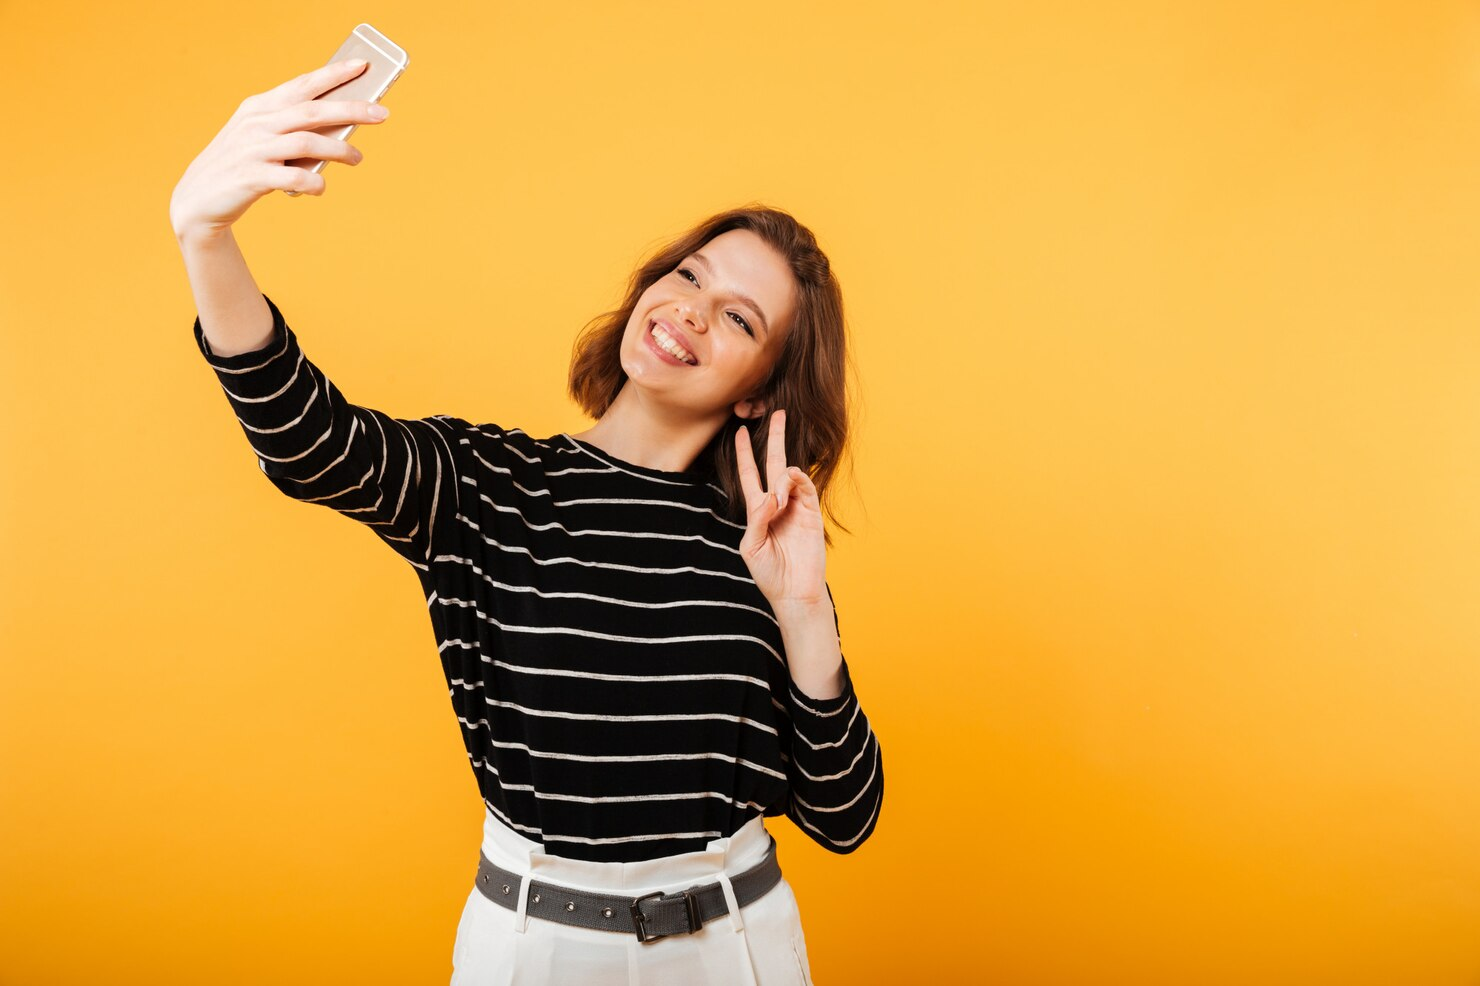 A woman making a victory sign while posing for a selfie.